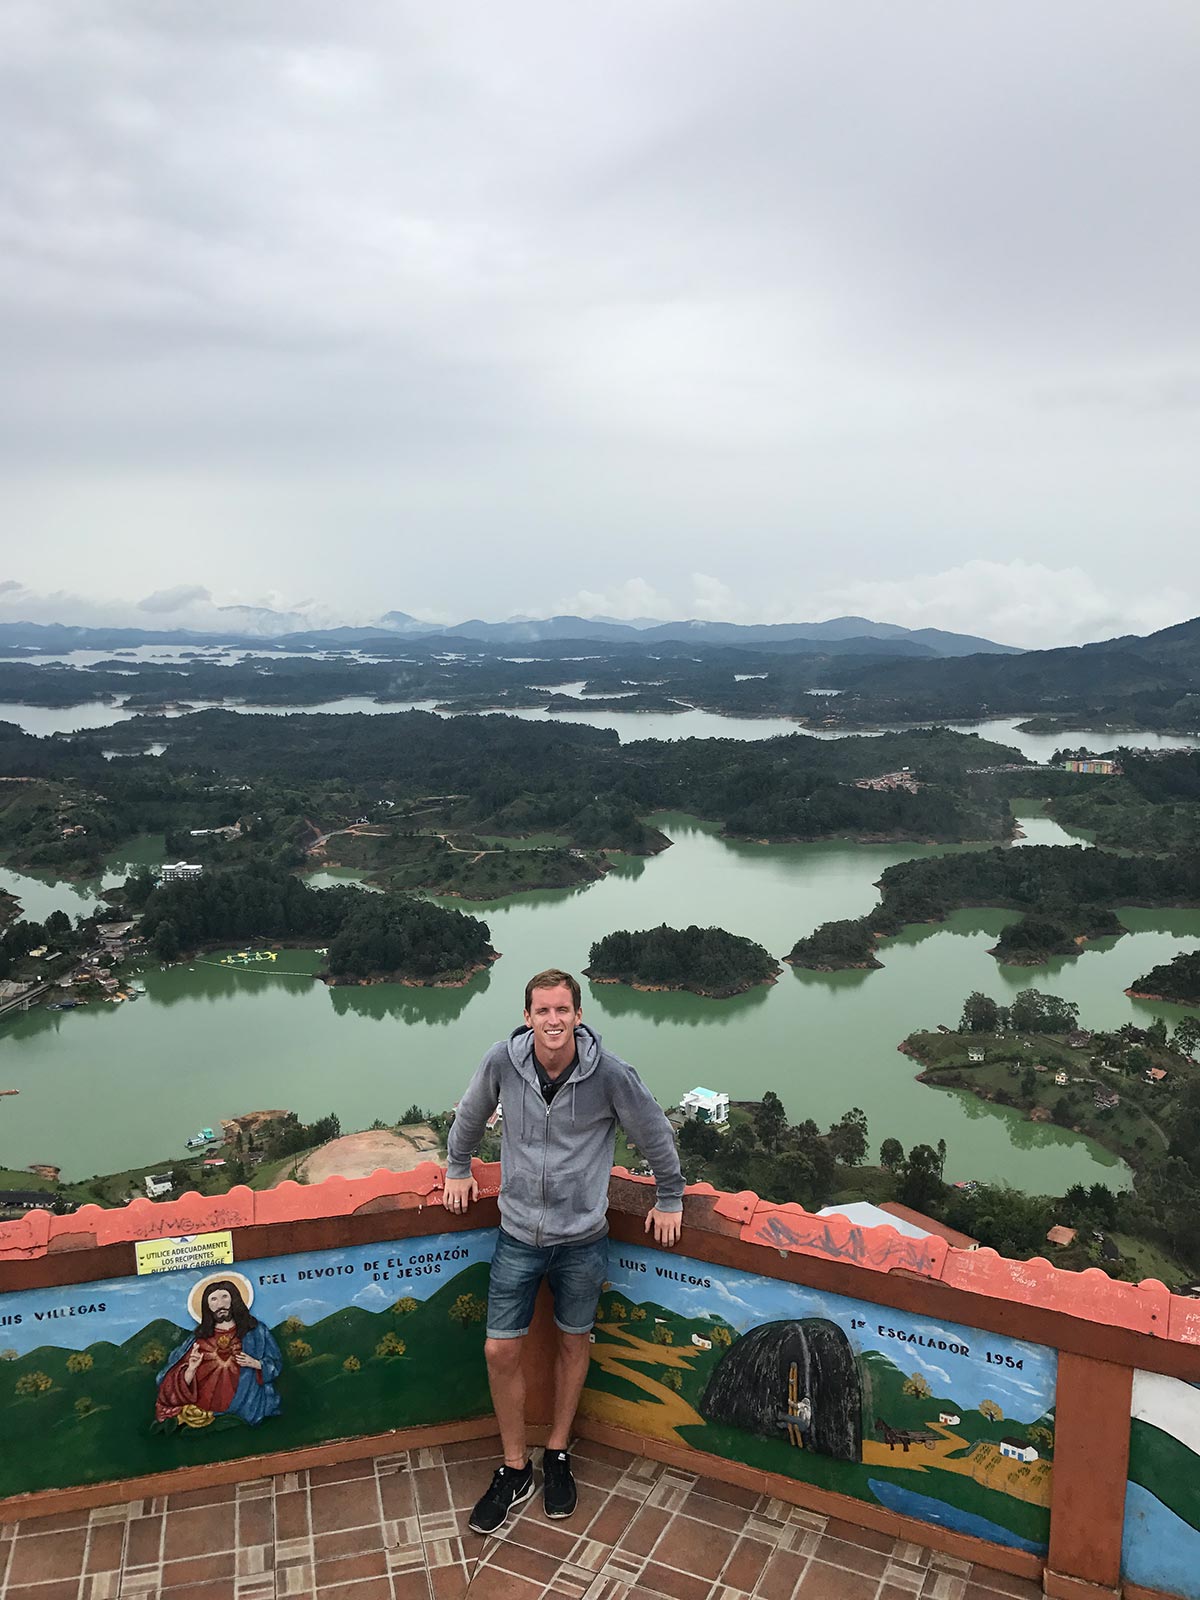 David Simpson on top of the giant rock, Piedra del Peñol at the Peñol-Guatapé Reservoir reservoir in Medellin, Colombia. 4 weeks and Carnival in Colombia